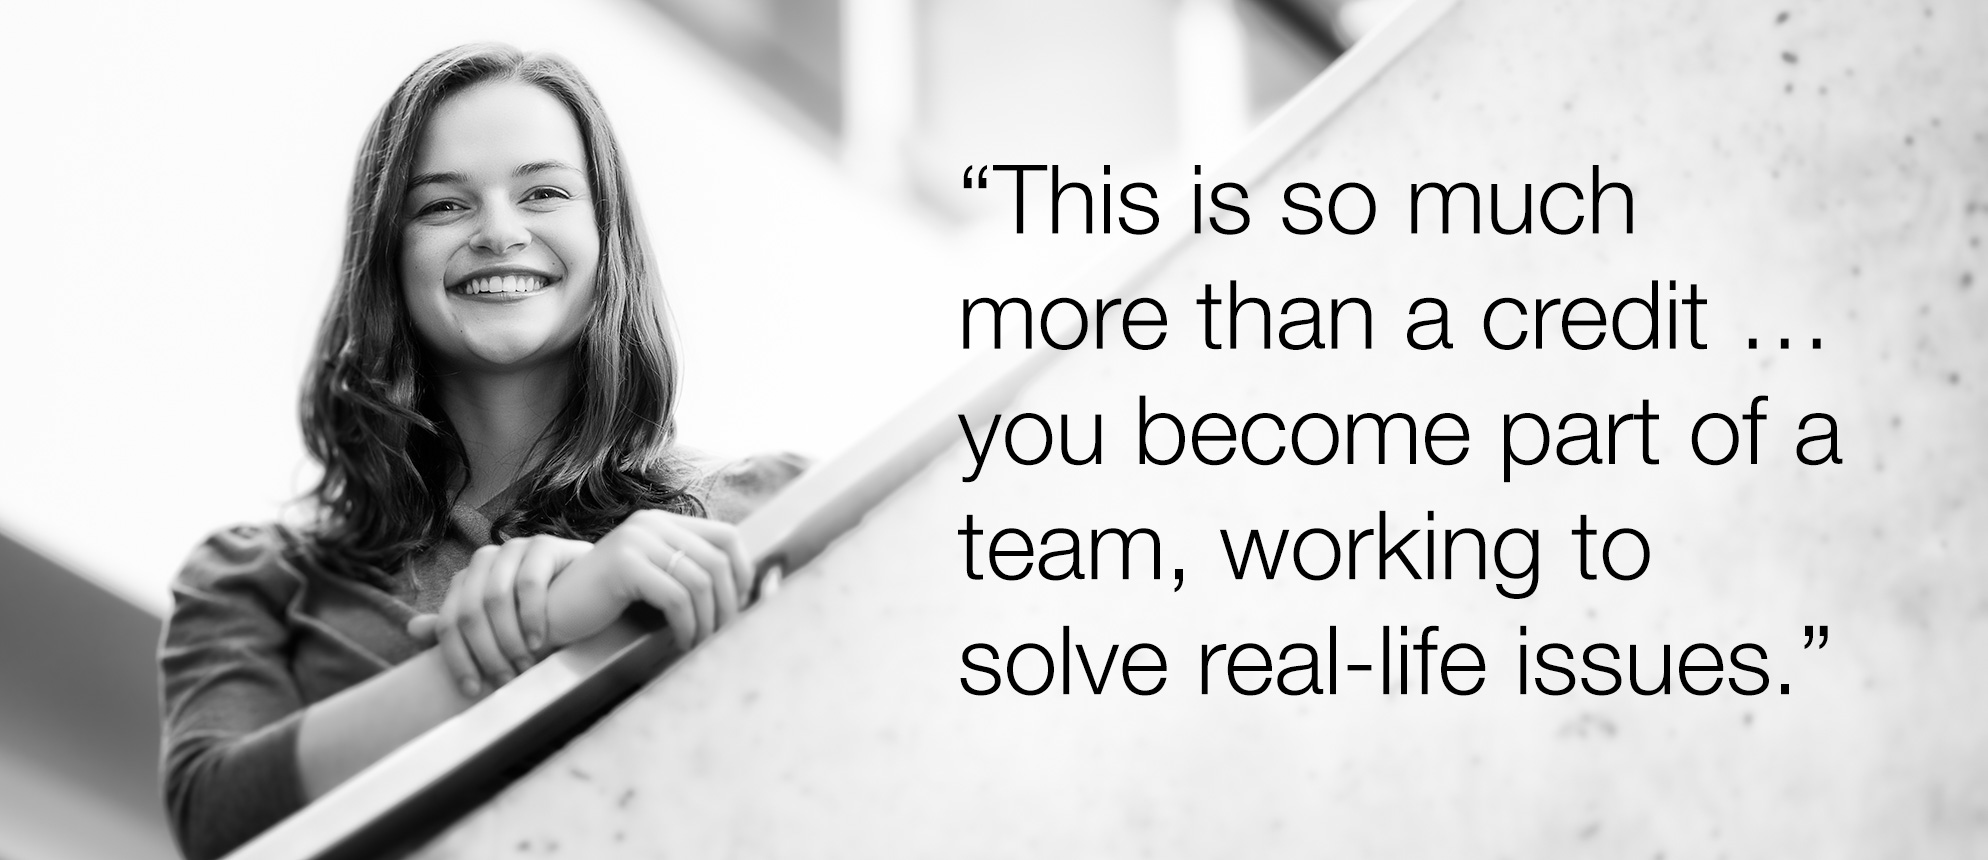 Holly Boyne: "This is so much more than a credit ... you become part of a team working to solve real-life issues." 